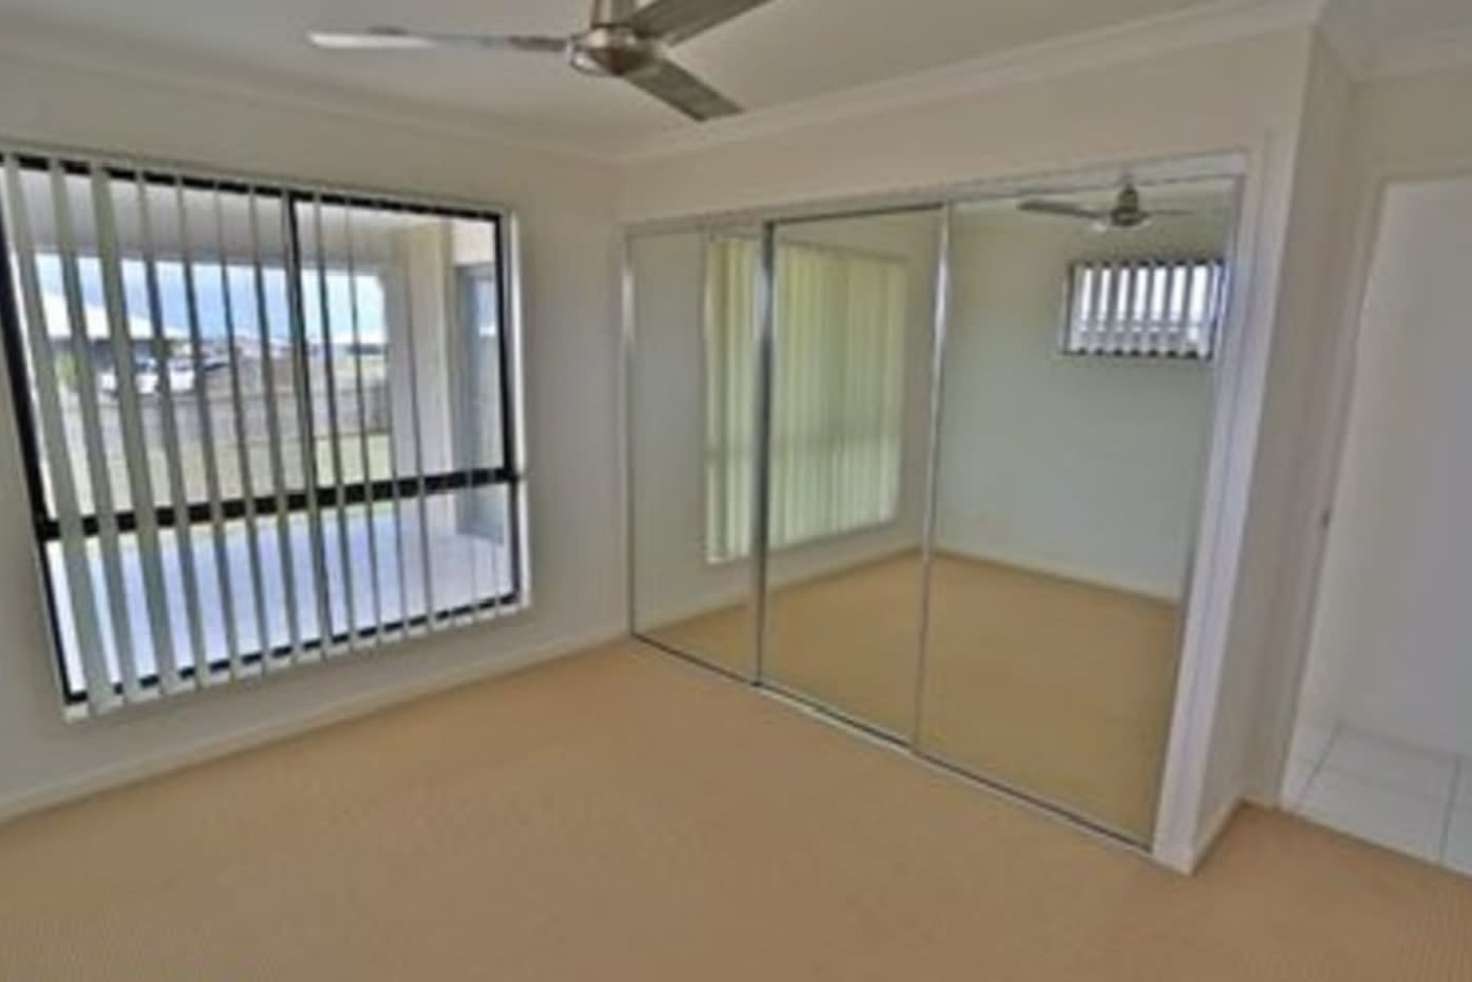 Main view of Homely house listing, 10 Falcon Crescent, Zilzie QLD 4710